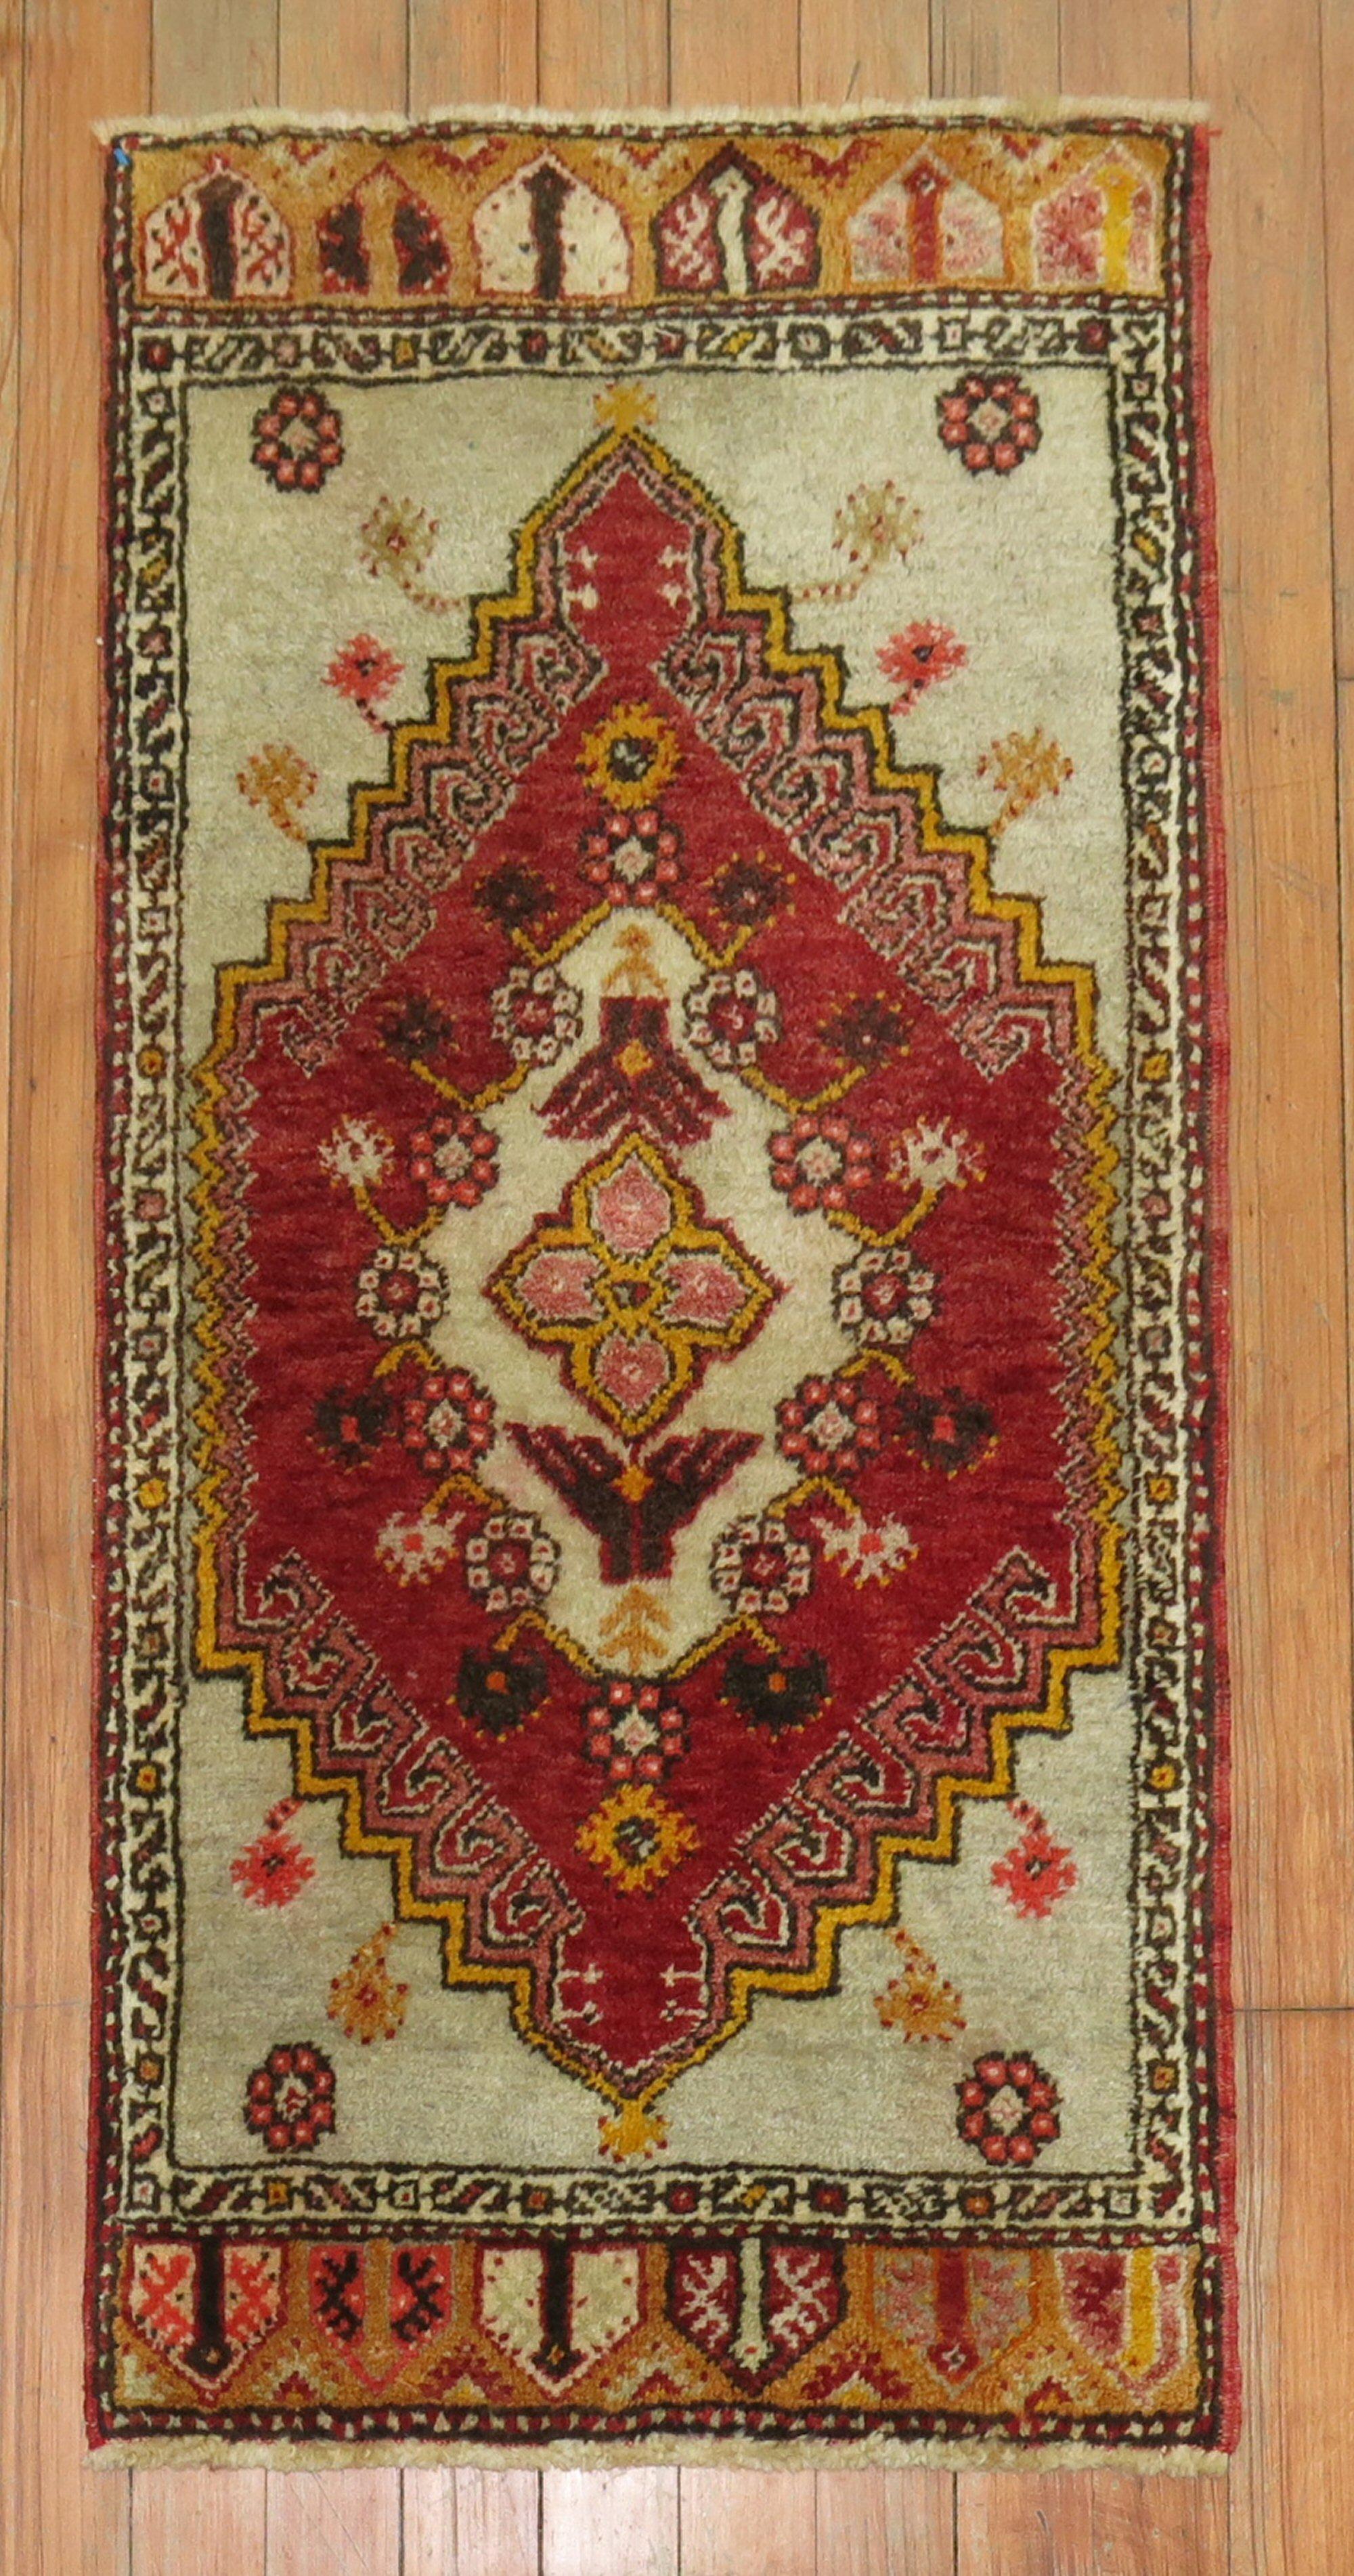 20th century one of a kind Turkish mat size rug.